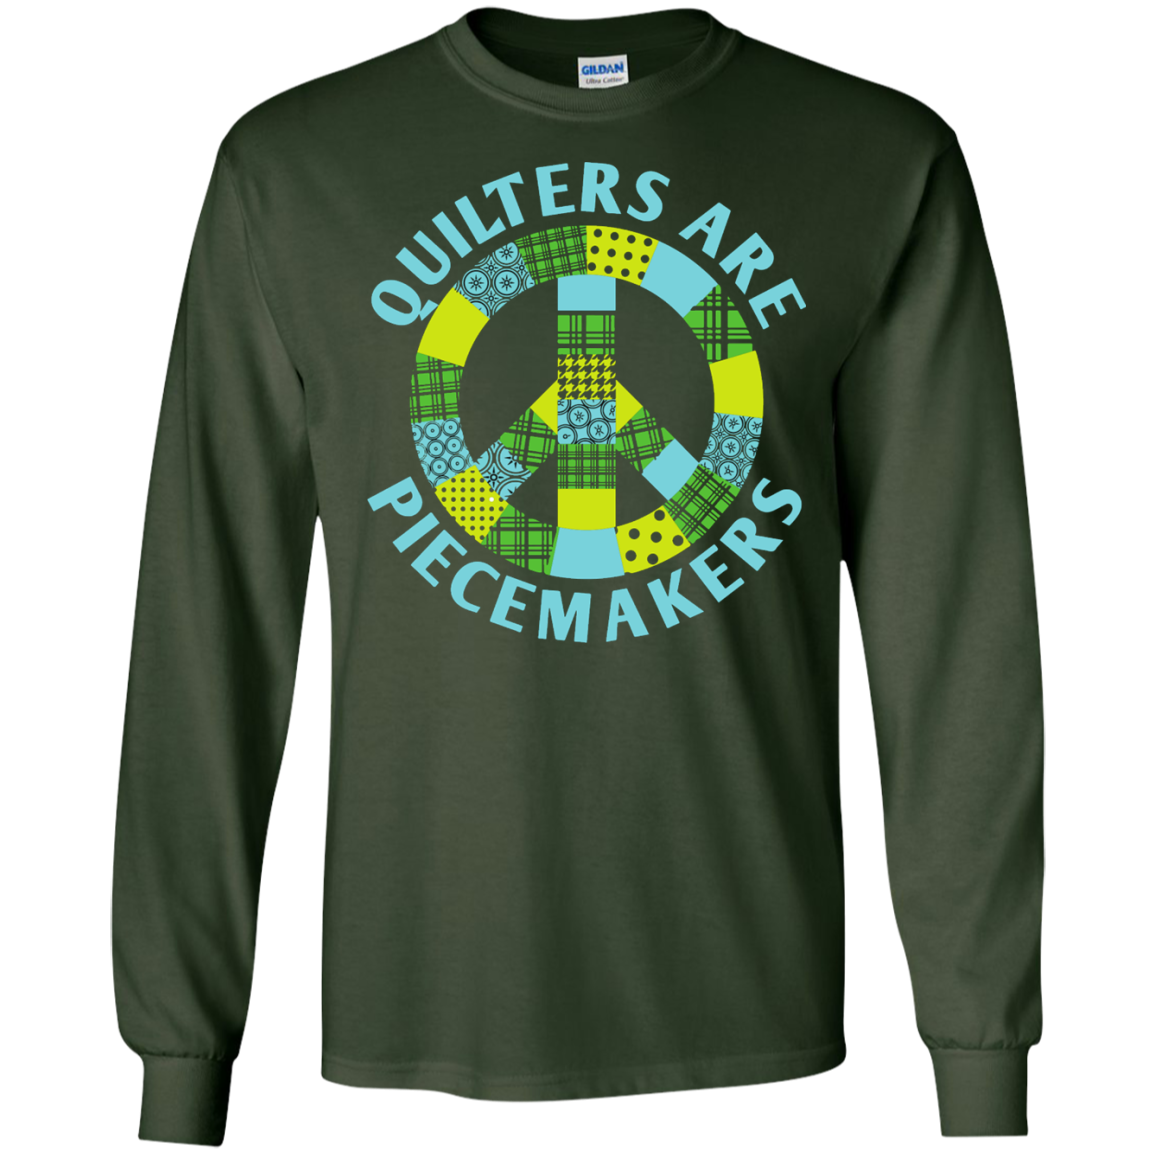 Quilters are Piecemakers Long Sleeve Ultra Cotton T-Shirt - Crafter4Life - 4